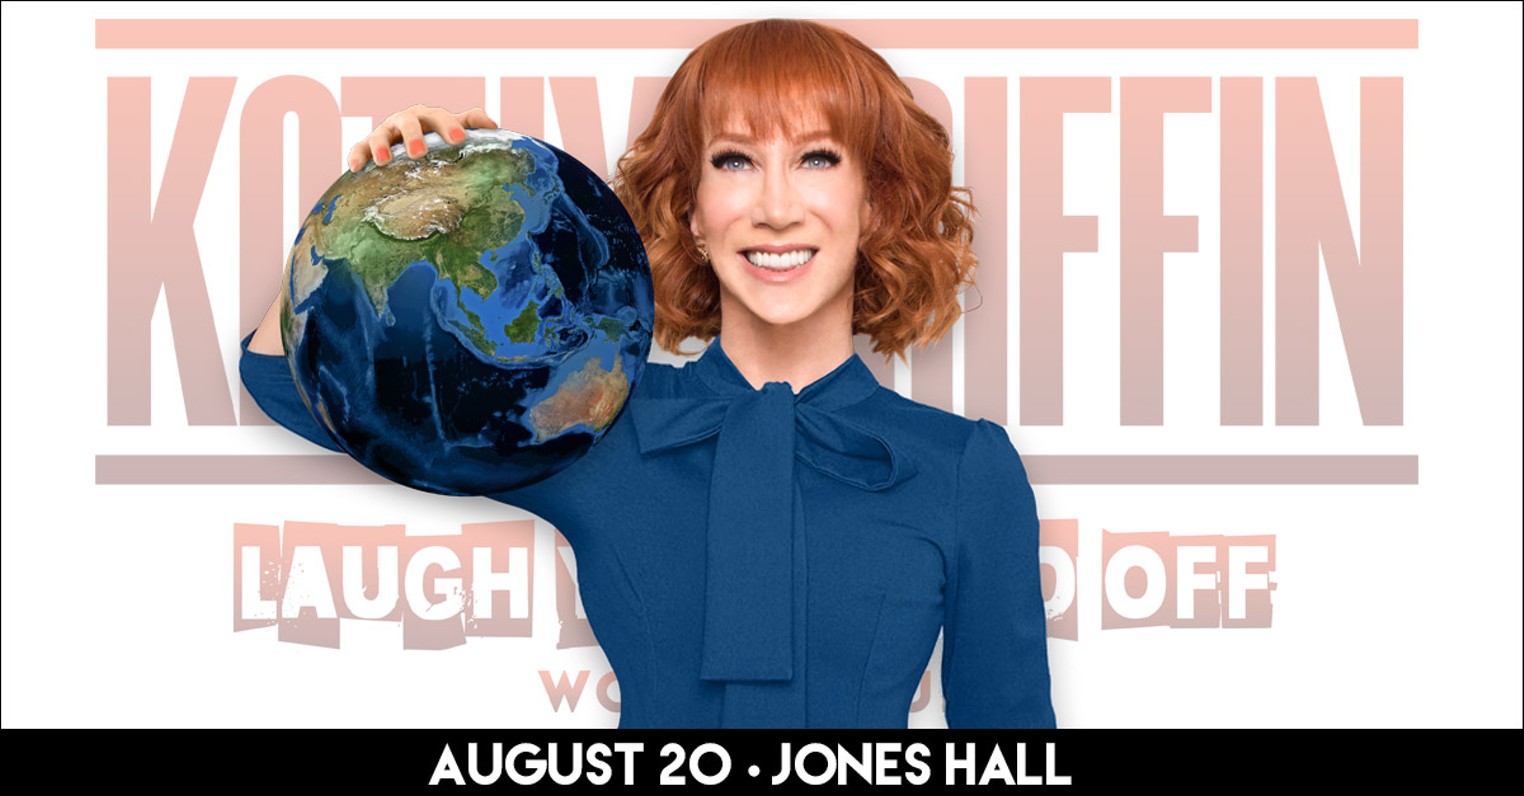 Preview Kathy Griffin at Jones Hall, Tickets On Sale Houston Press